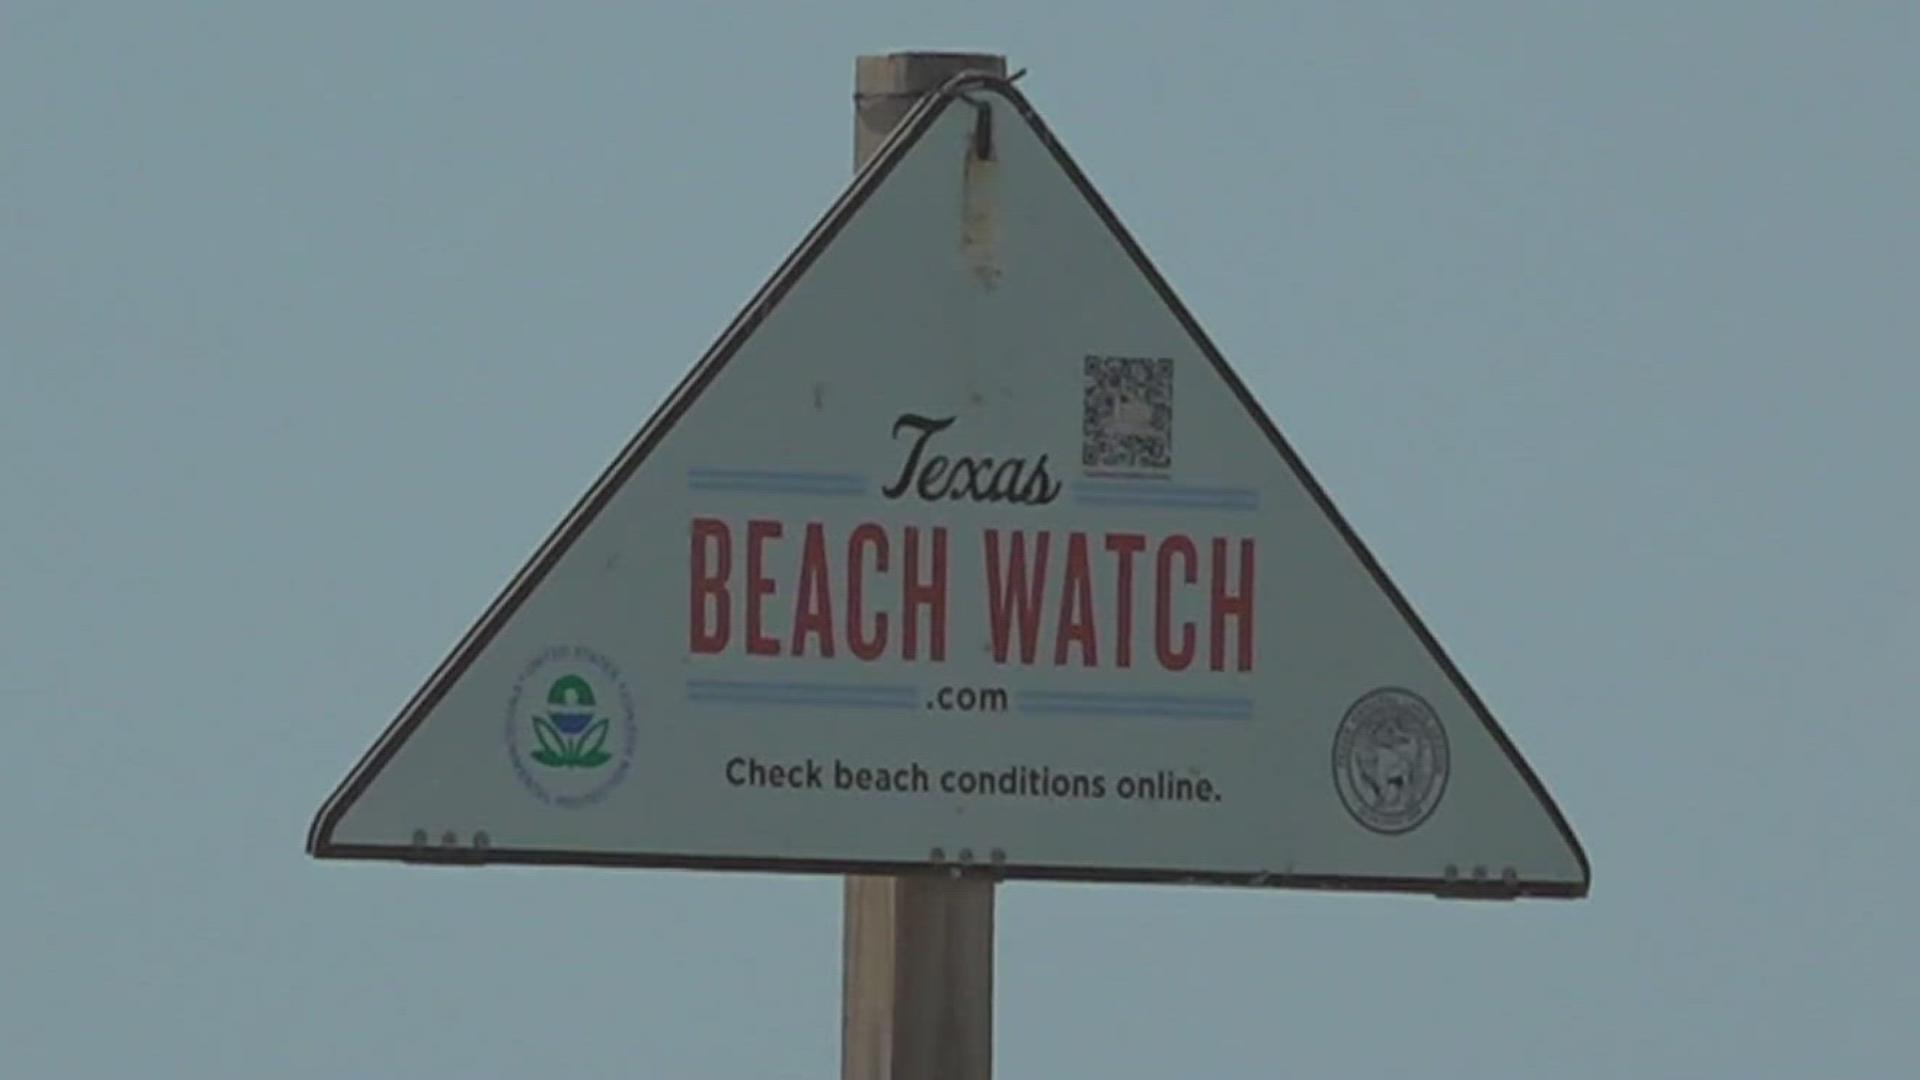 Assistant Director of Corpus Christi Parks and Recreation Sergio Gonzalez said his team has found various forms of debris along access roads and area beaches.